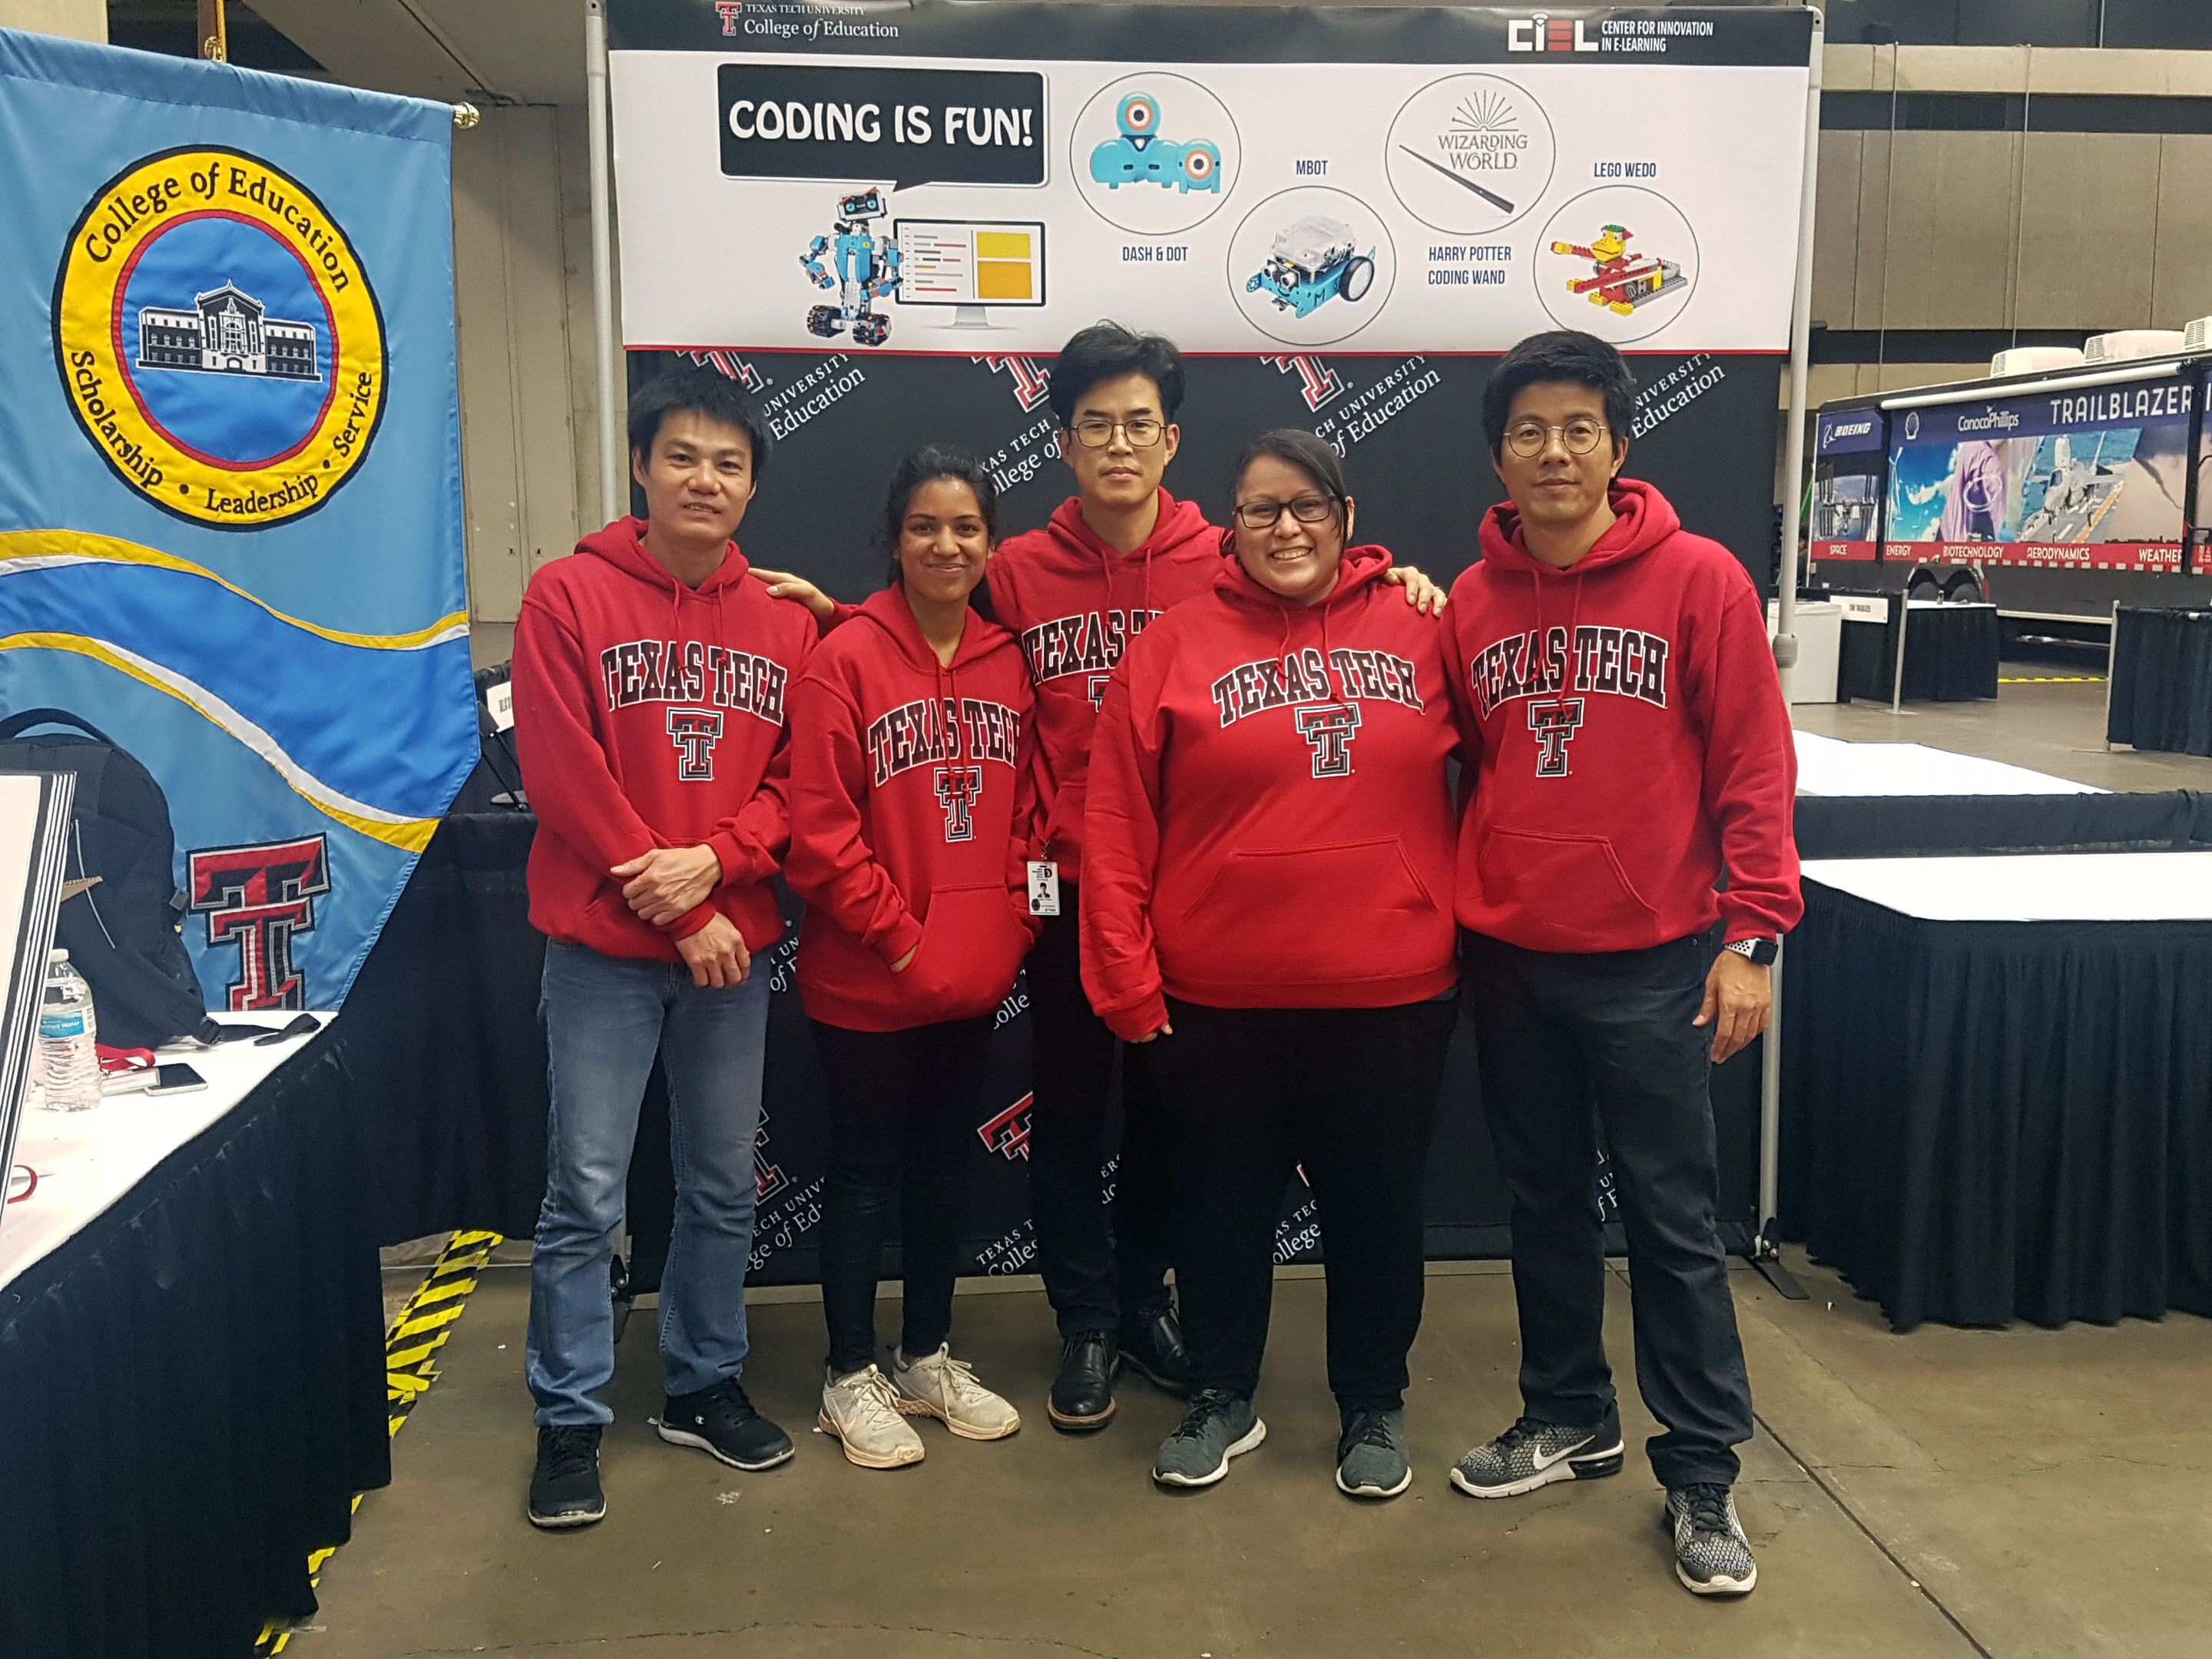 Dr. Jongpil Cheon, center, and his team at the Center for Innovation in eLearning (CIEL) were at the Dallas ISD STEM Expo, aiming to inspire students to consider a STEM education.  From left: Research Assistant Danh Nguyen, Research Assistant Navya Yenuganti, Cheon, Blackboard Specialist Amanda Solis, Research Assistant Hyunchang Moon.